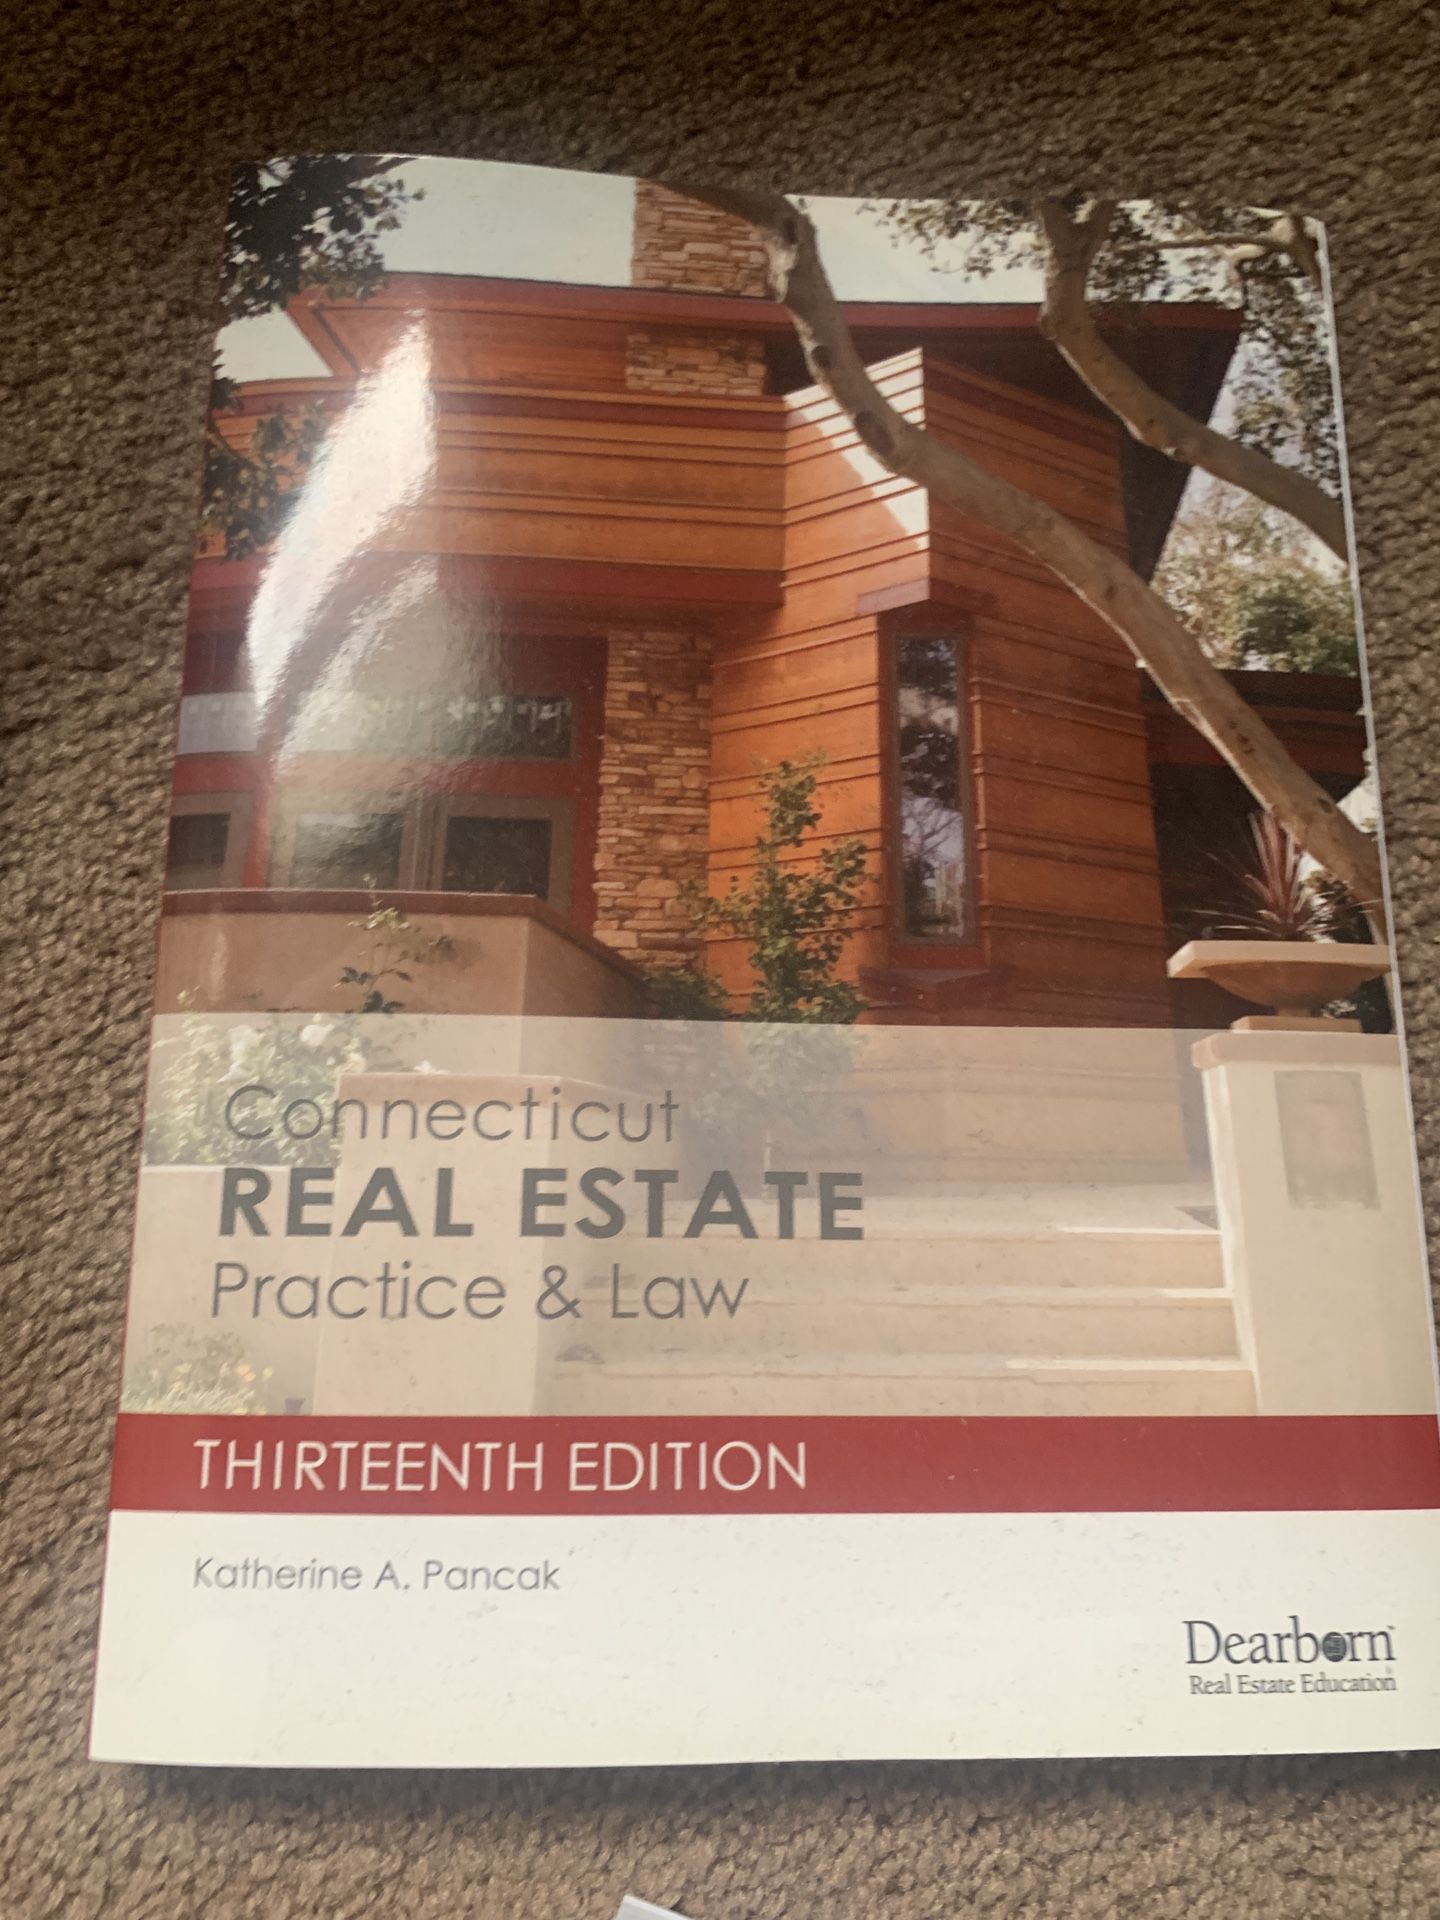 Connecticut Real Estate Practice & Law 13th edition